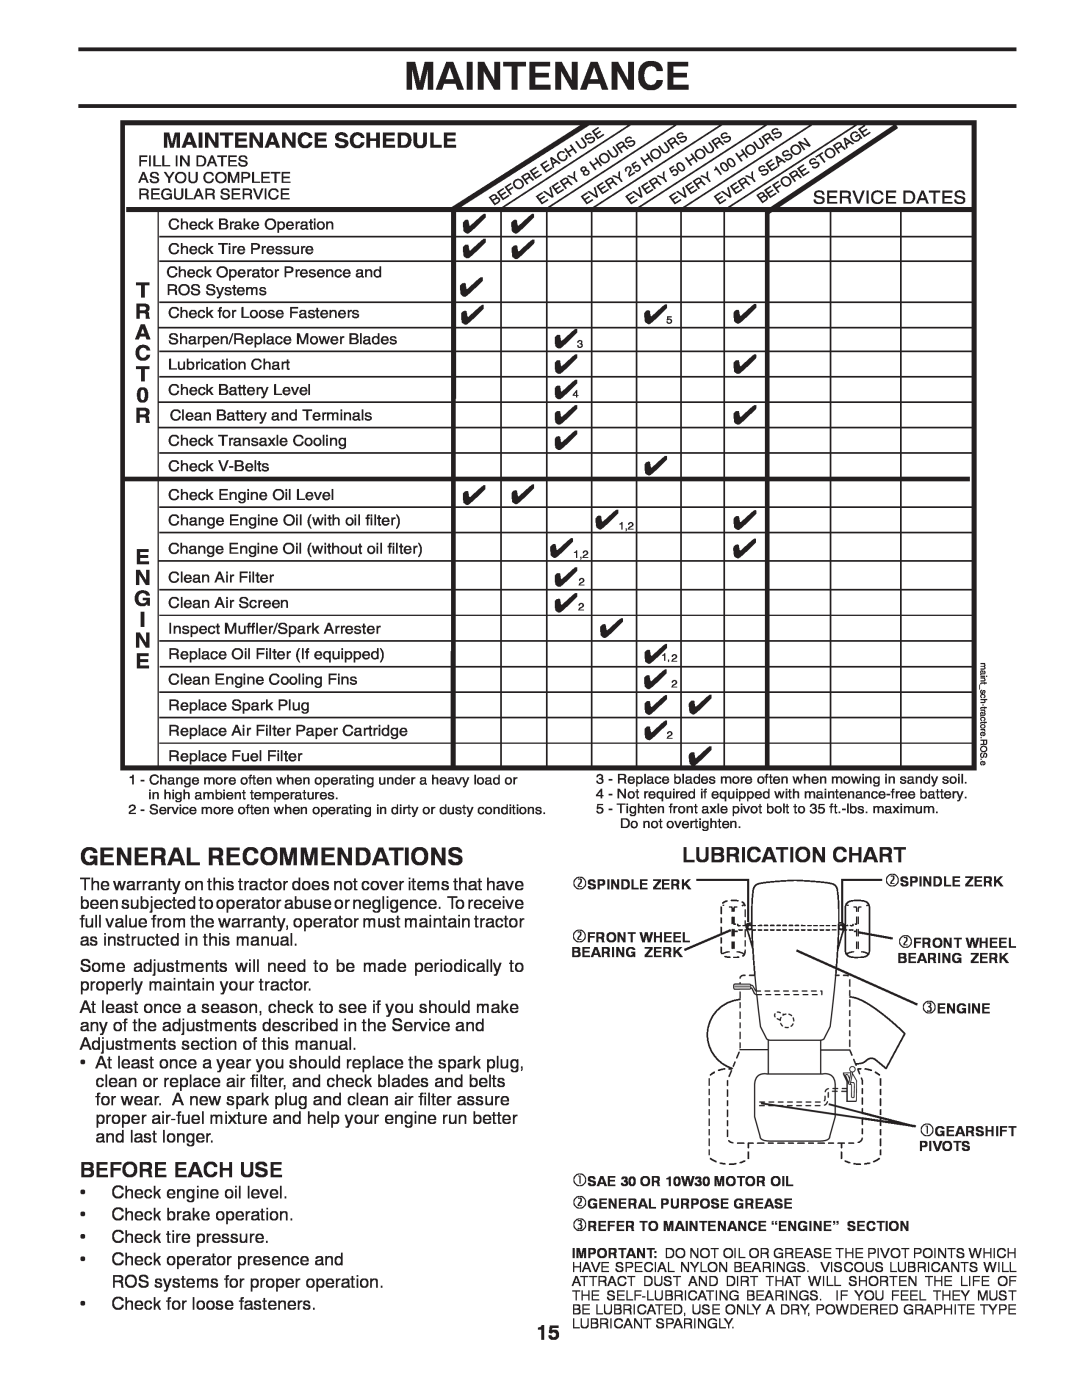 Poulan 425179 manual General Recommendations, Maintenance Schedule, Before Each Use, Lubrication Chart, Service Dates 